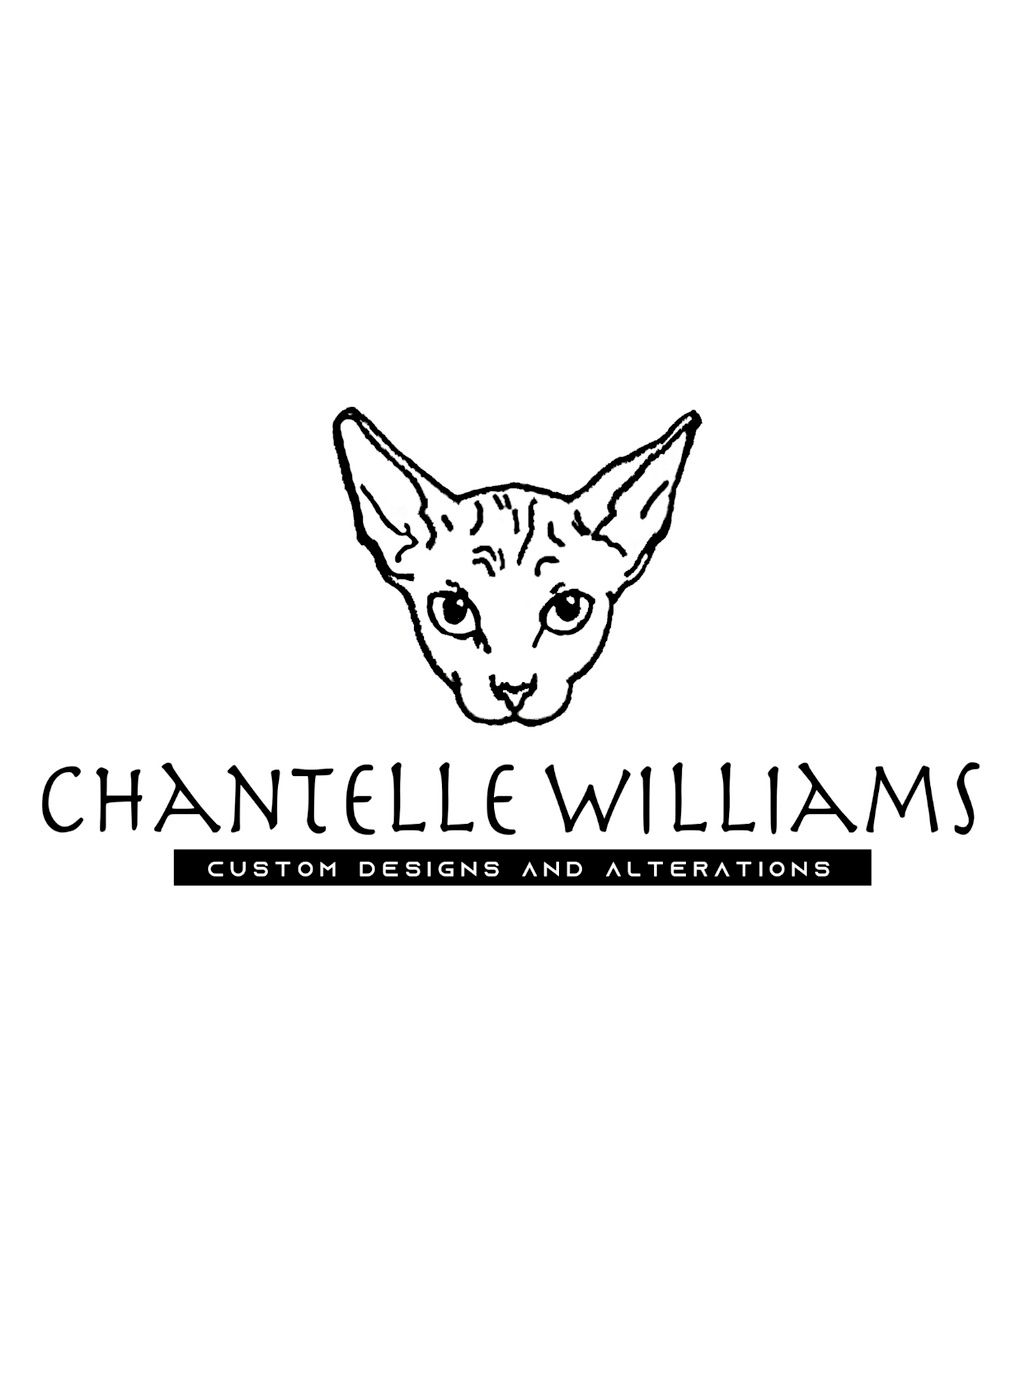 Chantelle Williams Custom Designs and Alterations